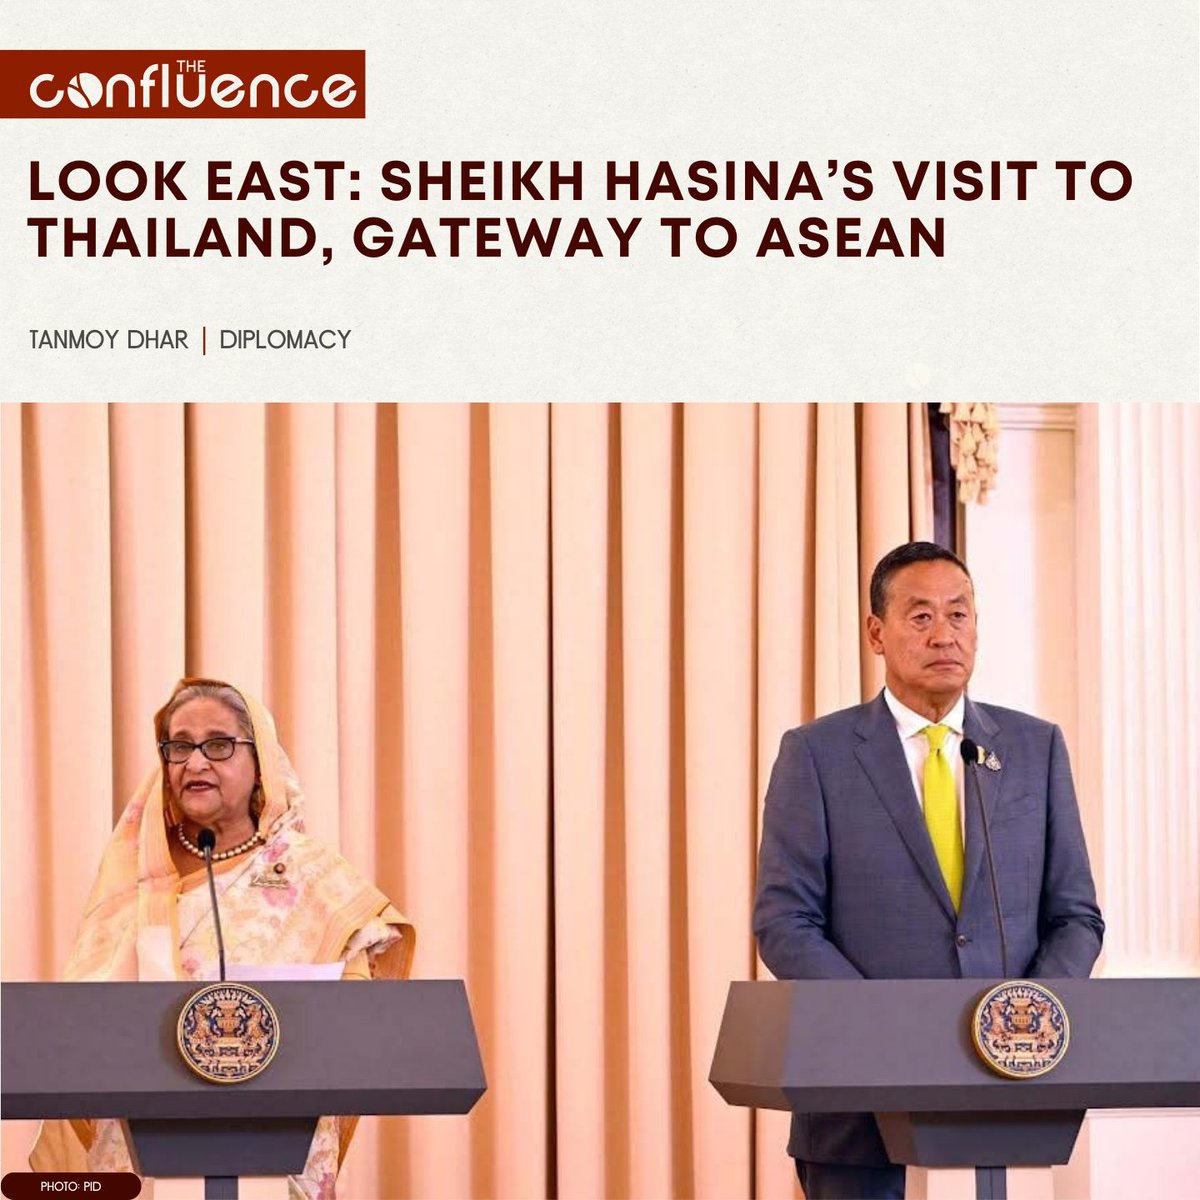 PM #SheikhHasina concluded a 6-day visit to 🇹🇭 recently. Analysts opine that 🇹🇭 can be an important partner for 🇧🇩 in maritime economy, #ClimateJustice, #ecotourism, etc. and also provide 🇧🇩 with a gateway into the #ASEAN bloc. Read T. Dhar's take here 👇
theconfluence.blog/look-east-shei…